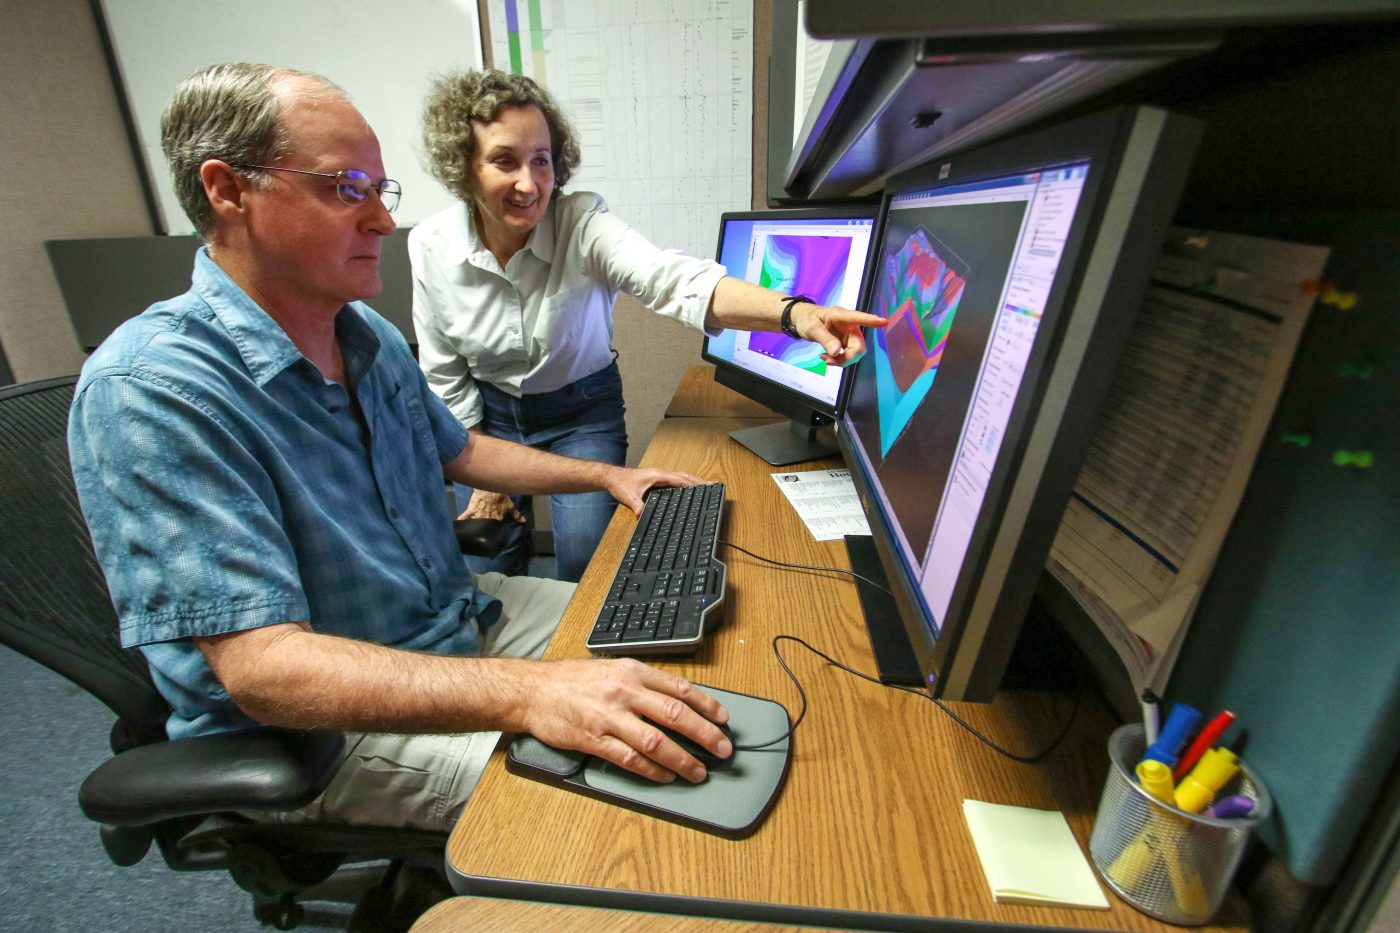 A man and woman consult a computer monitor.